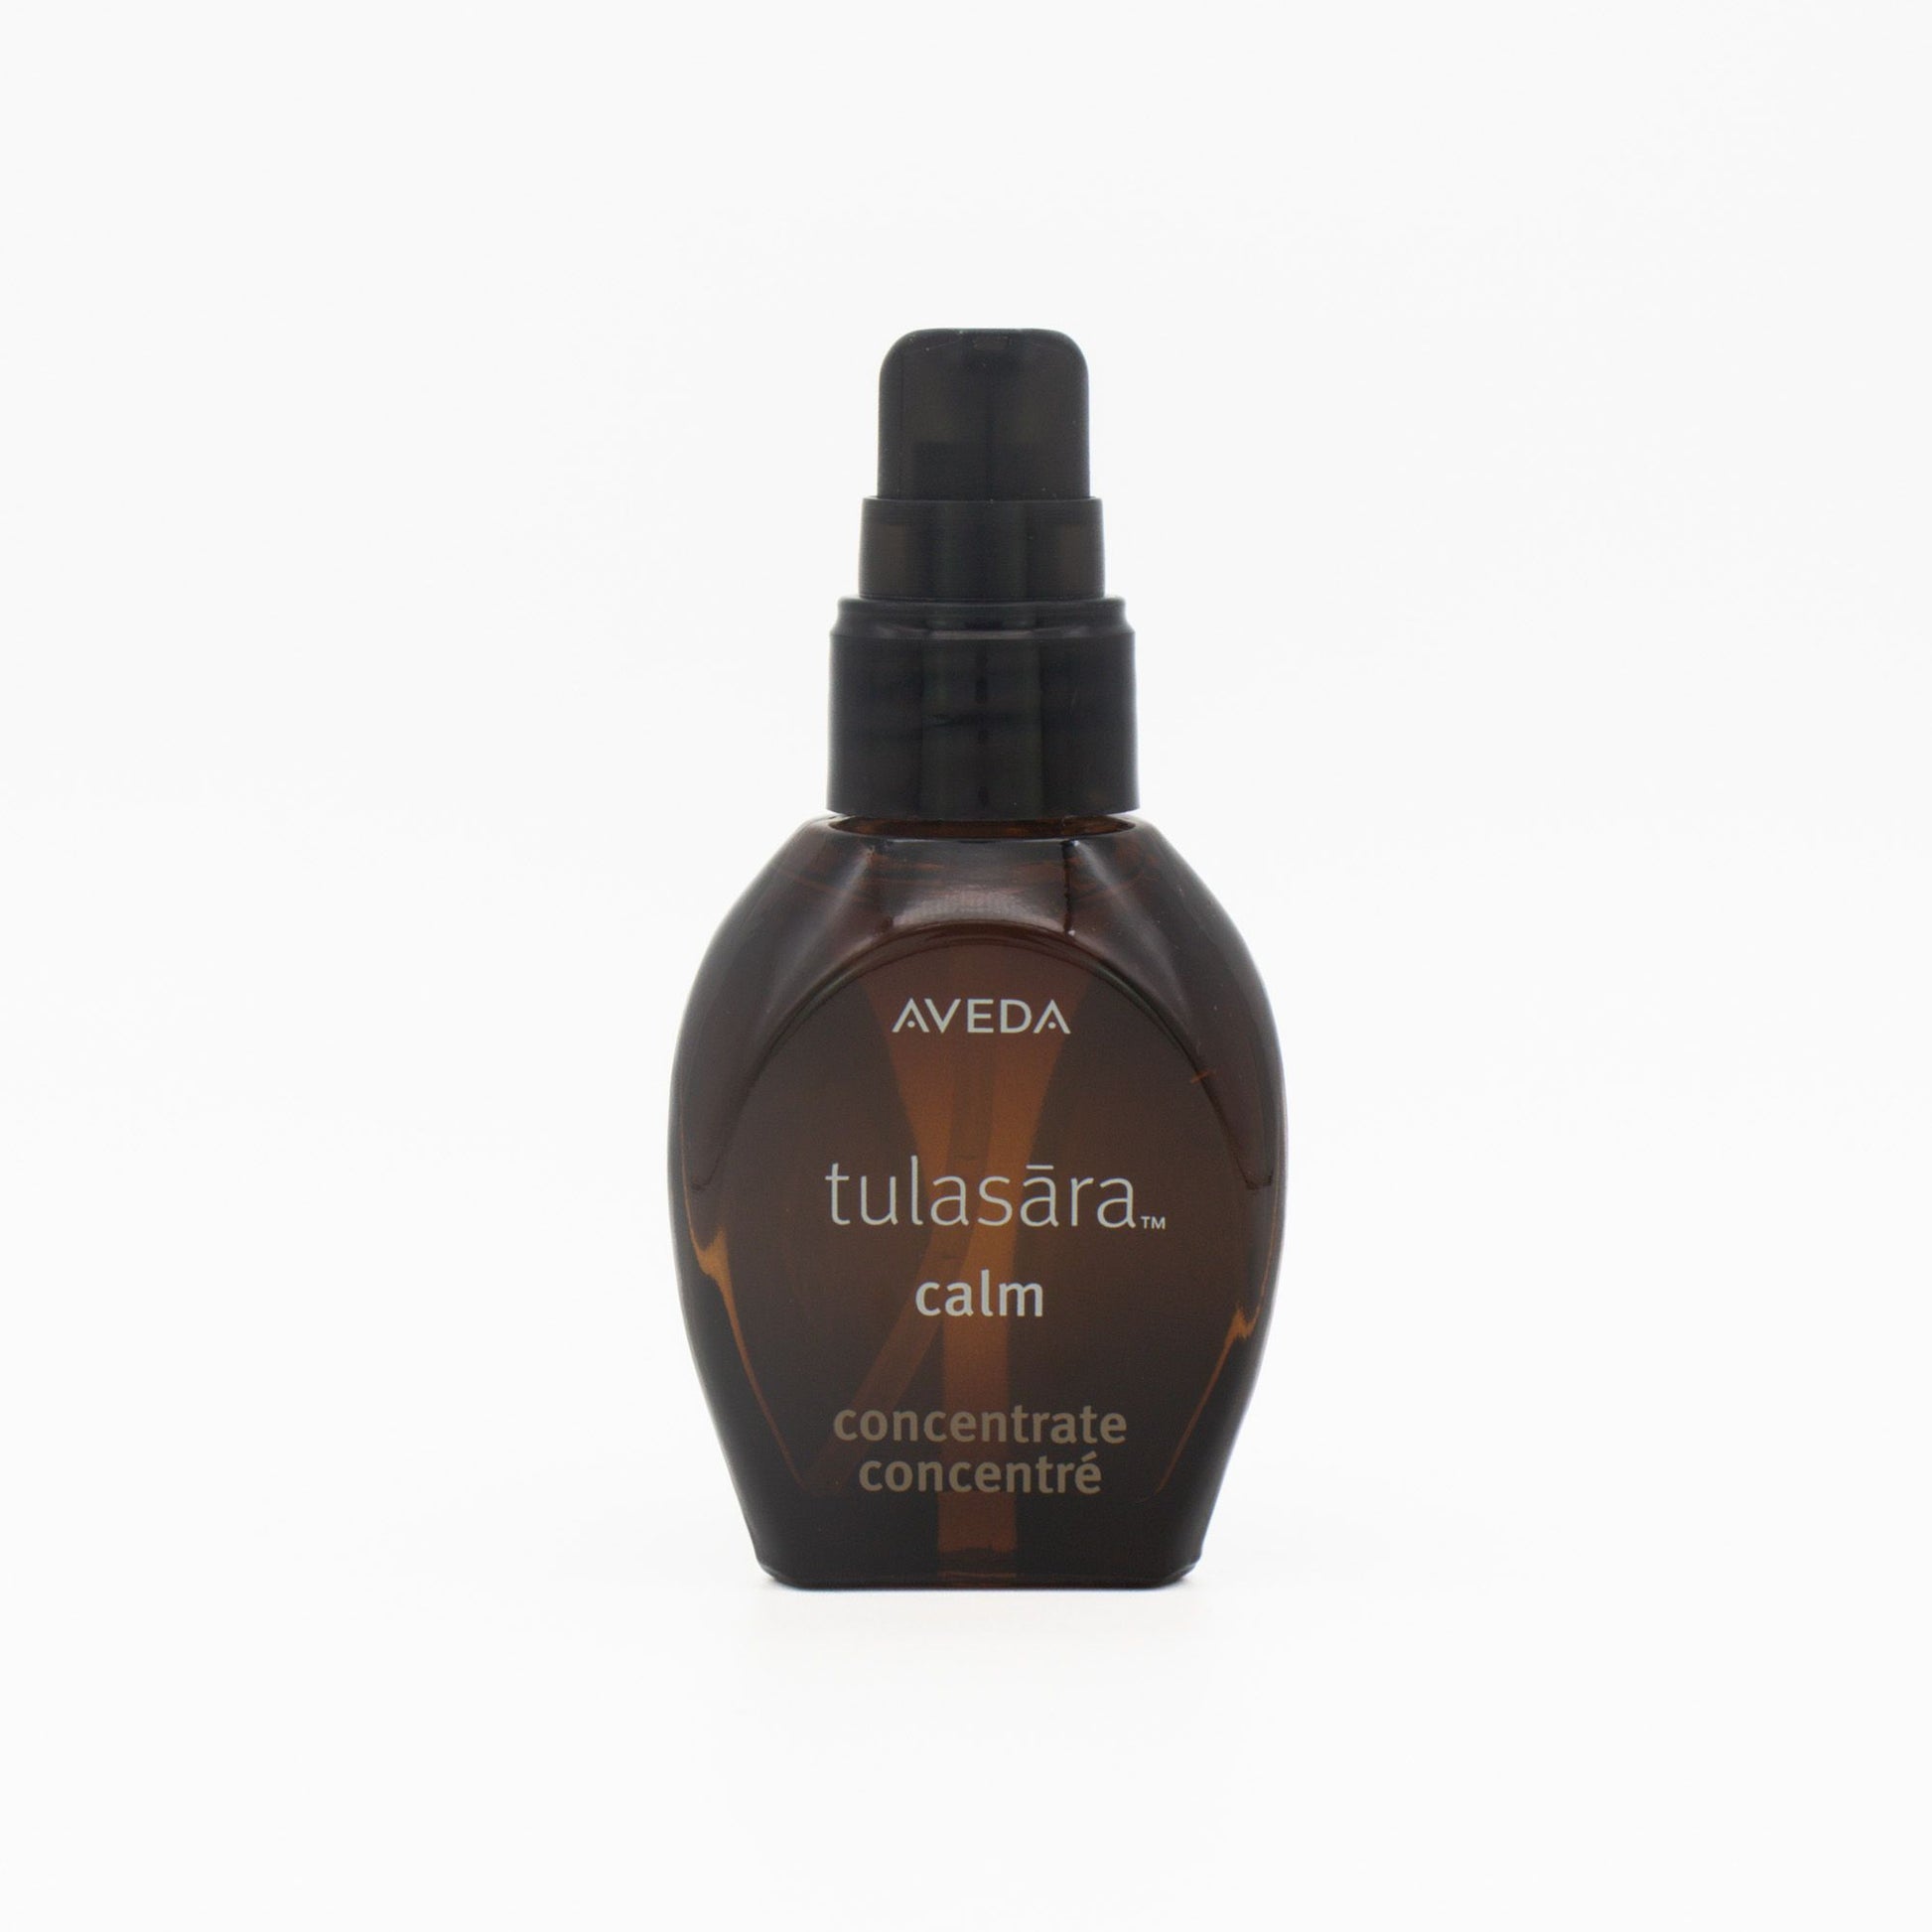 Aveda Tulasara Calm Concentrate 30ml - Imperfect Box - This is Beauty UK